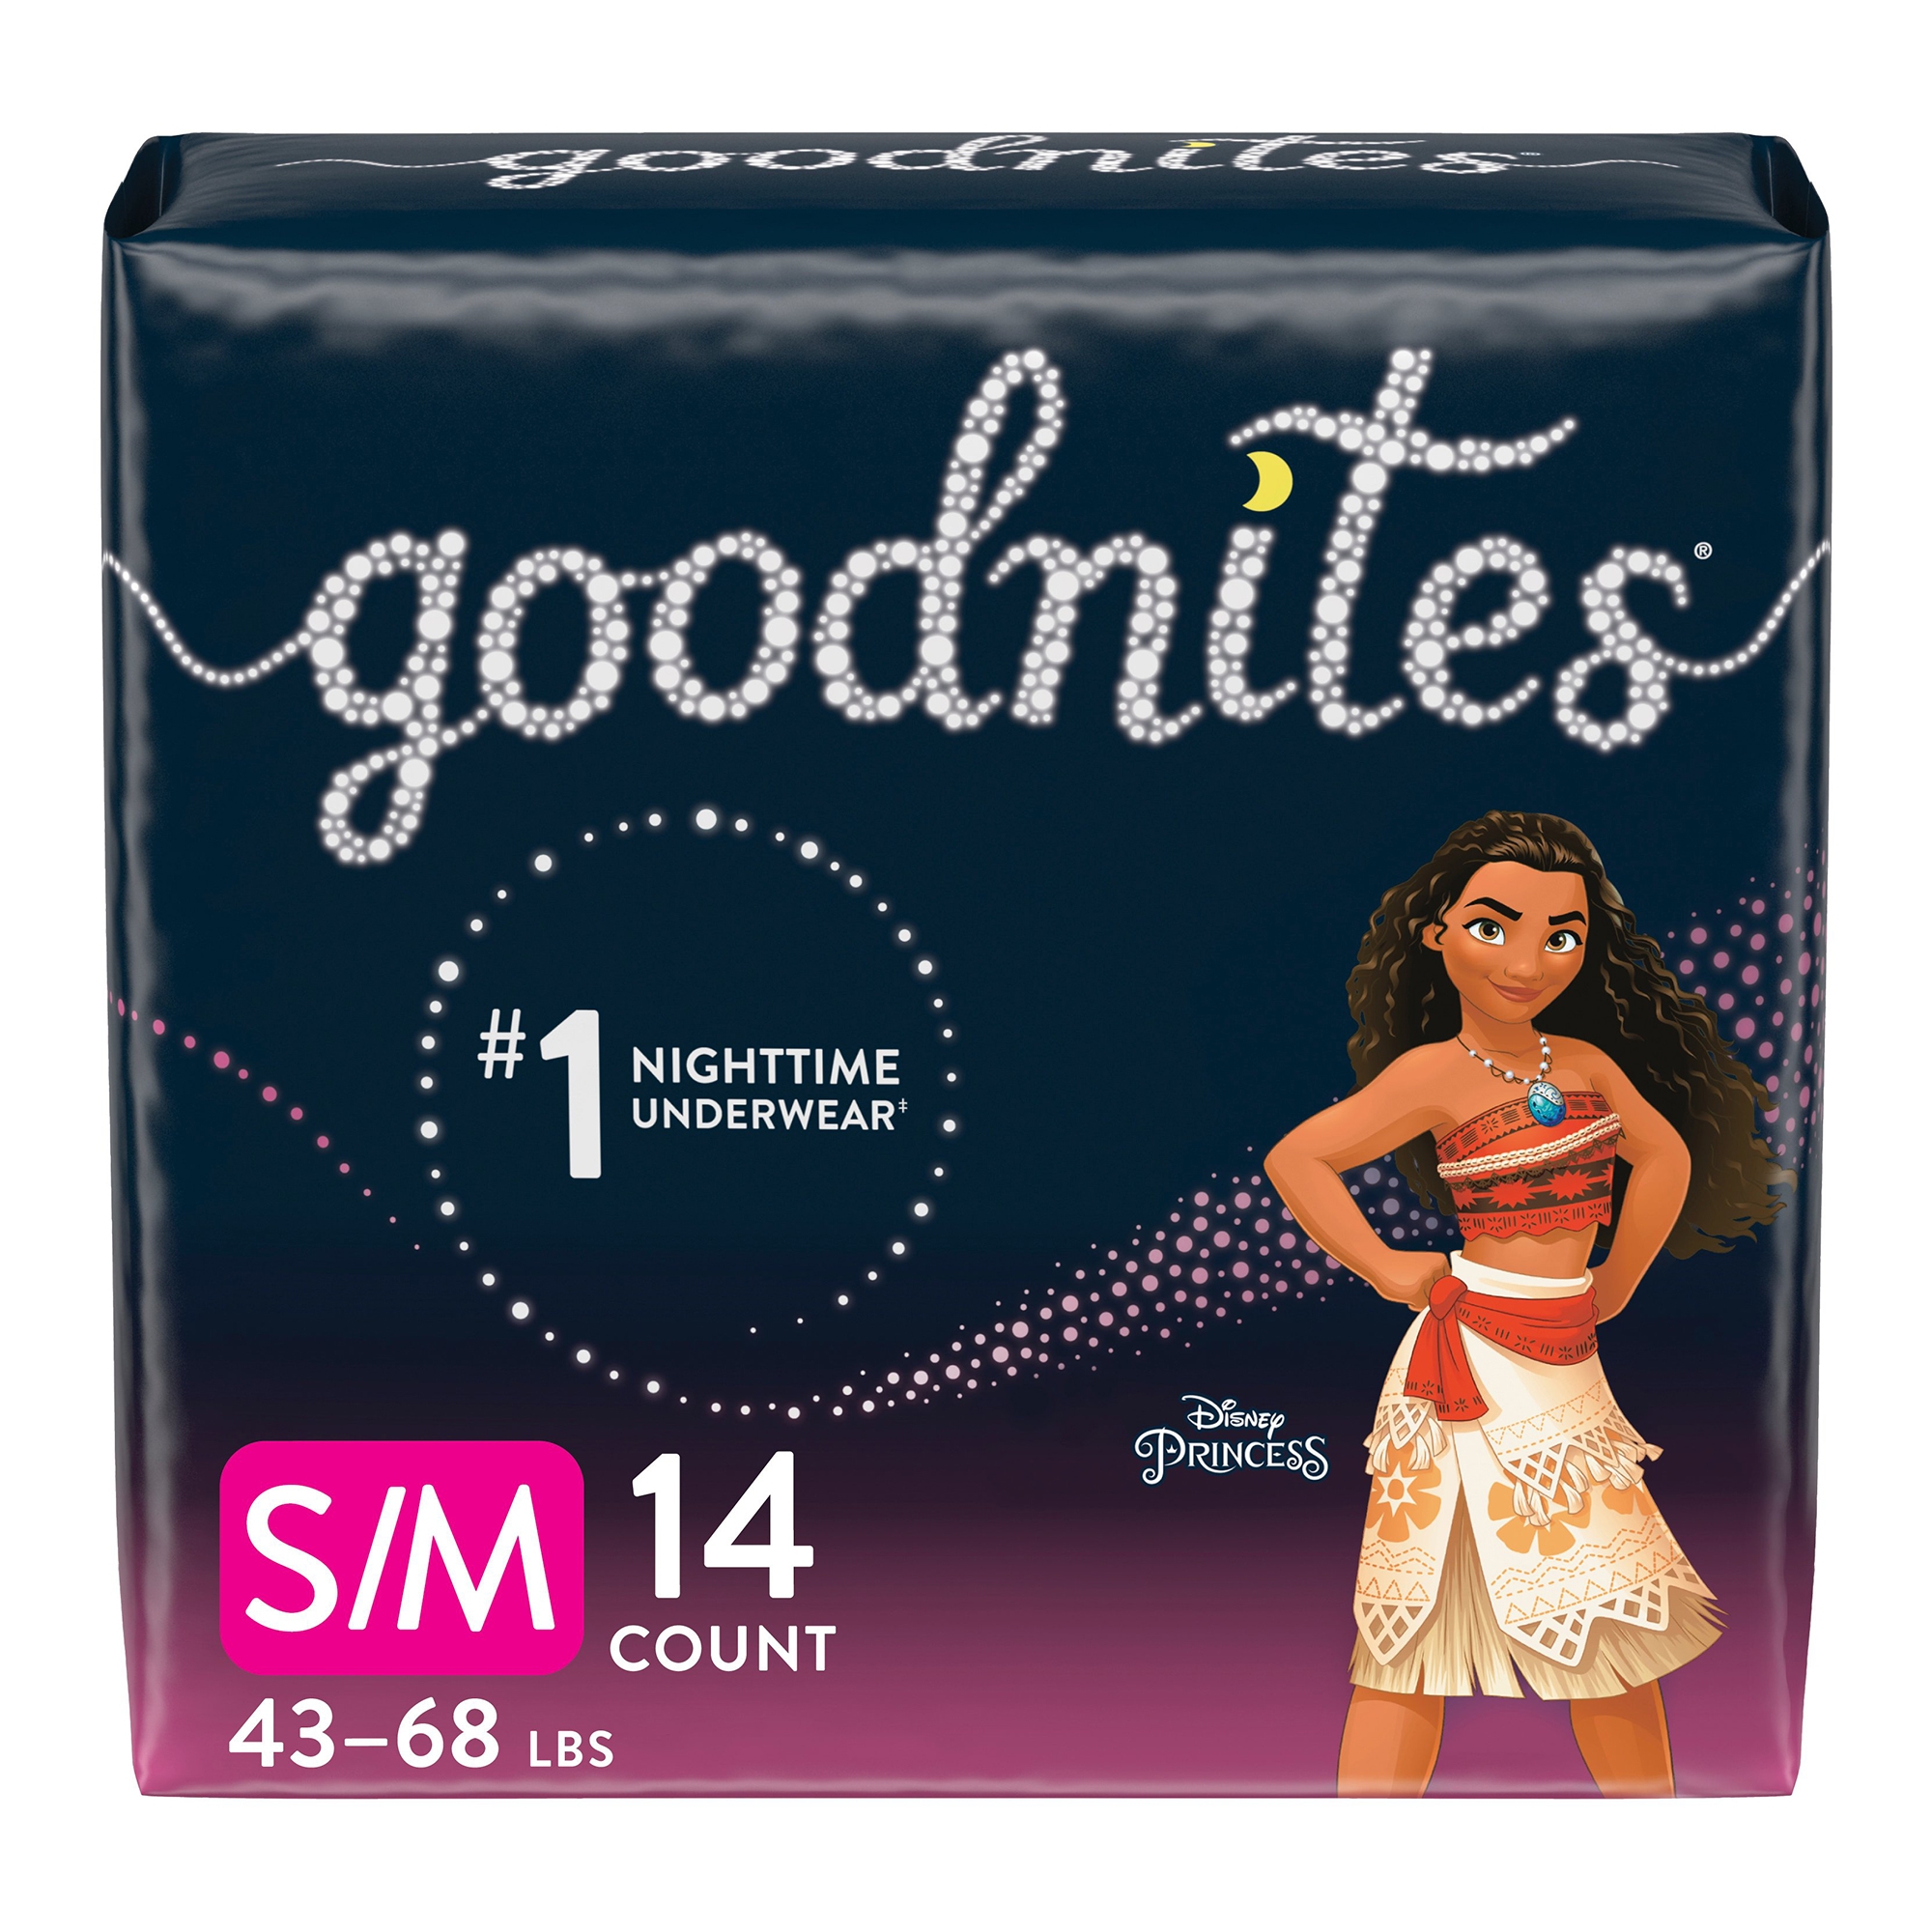 GoodNites Bedtime Bedwetting Underwear for Girls, Size XS, 88 ct. 